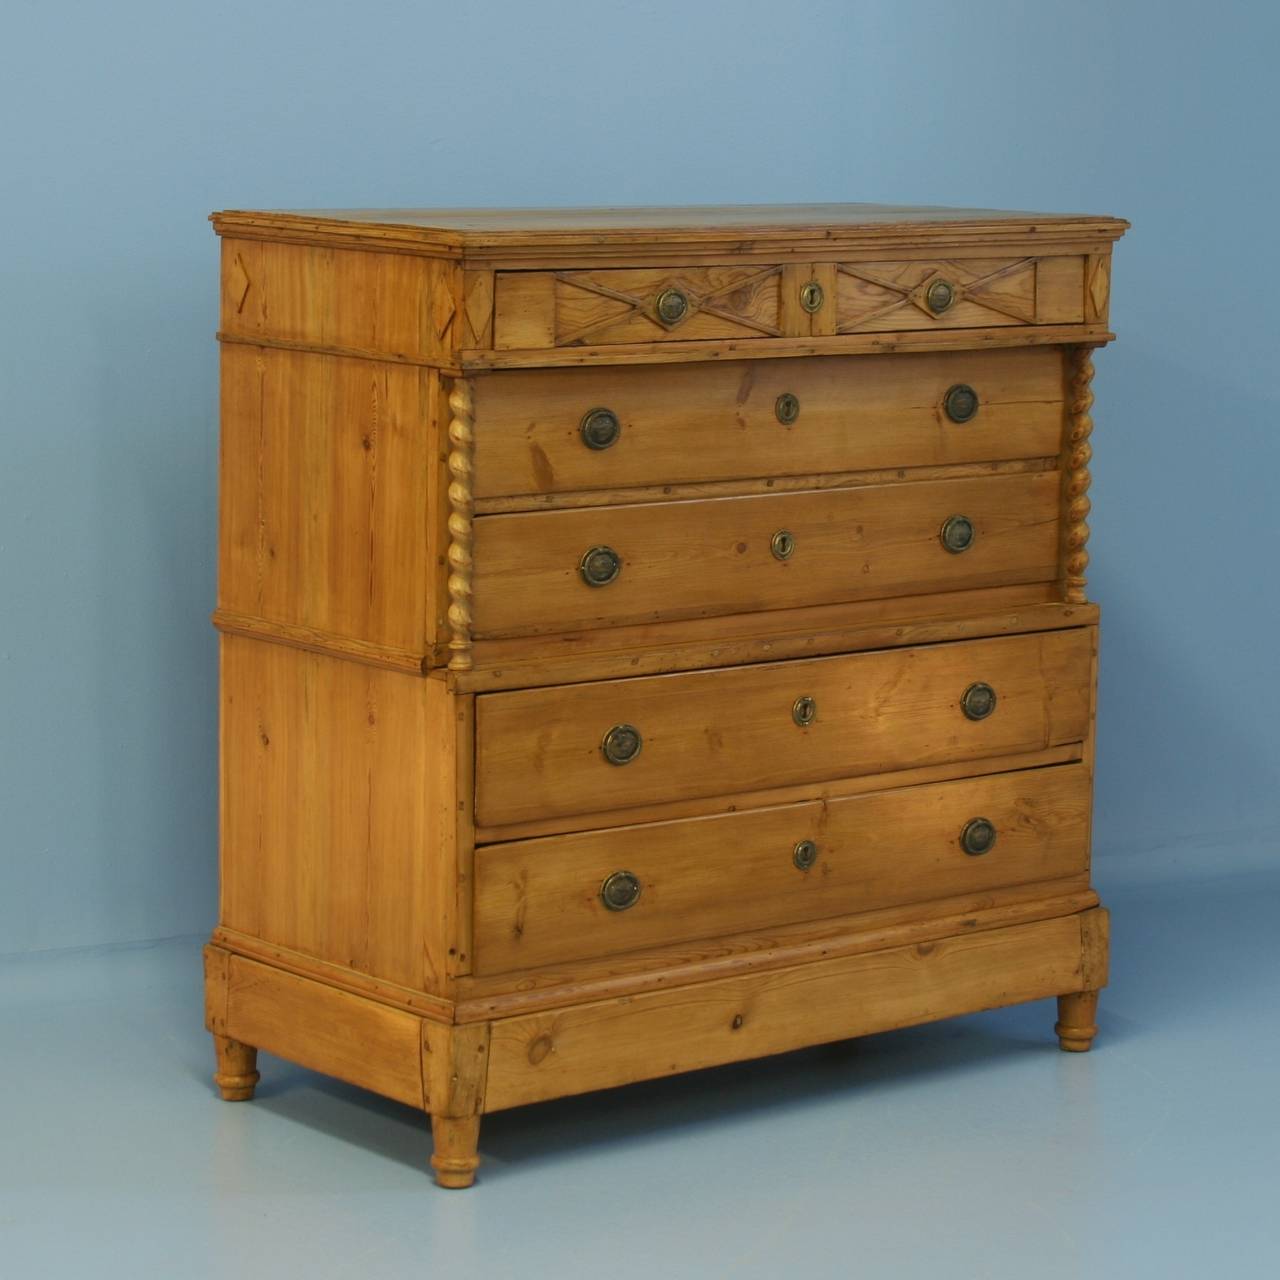 This large chest of drawers is striking due to the many design elements blended beautifully here. The barley twist columns accent 2 recessed drawers. Carved diamonds and details on the top drawer brings attention to the upper section. Overall, this